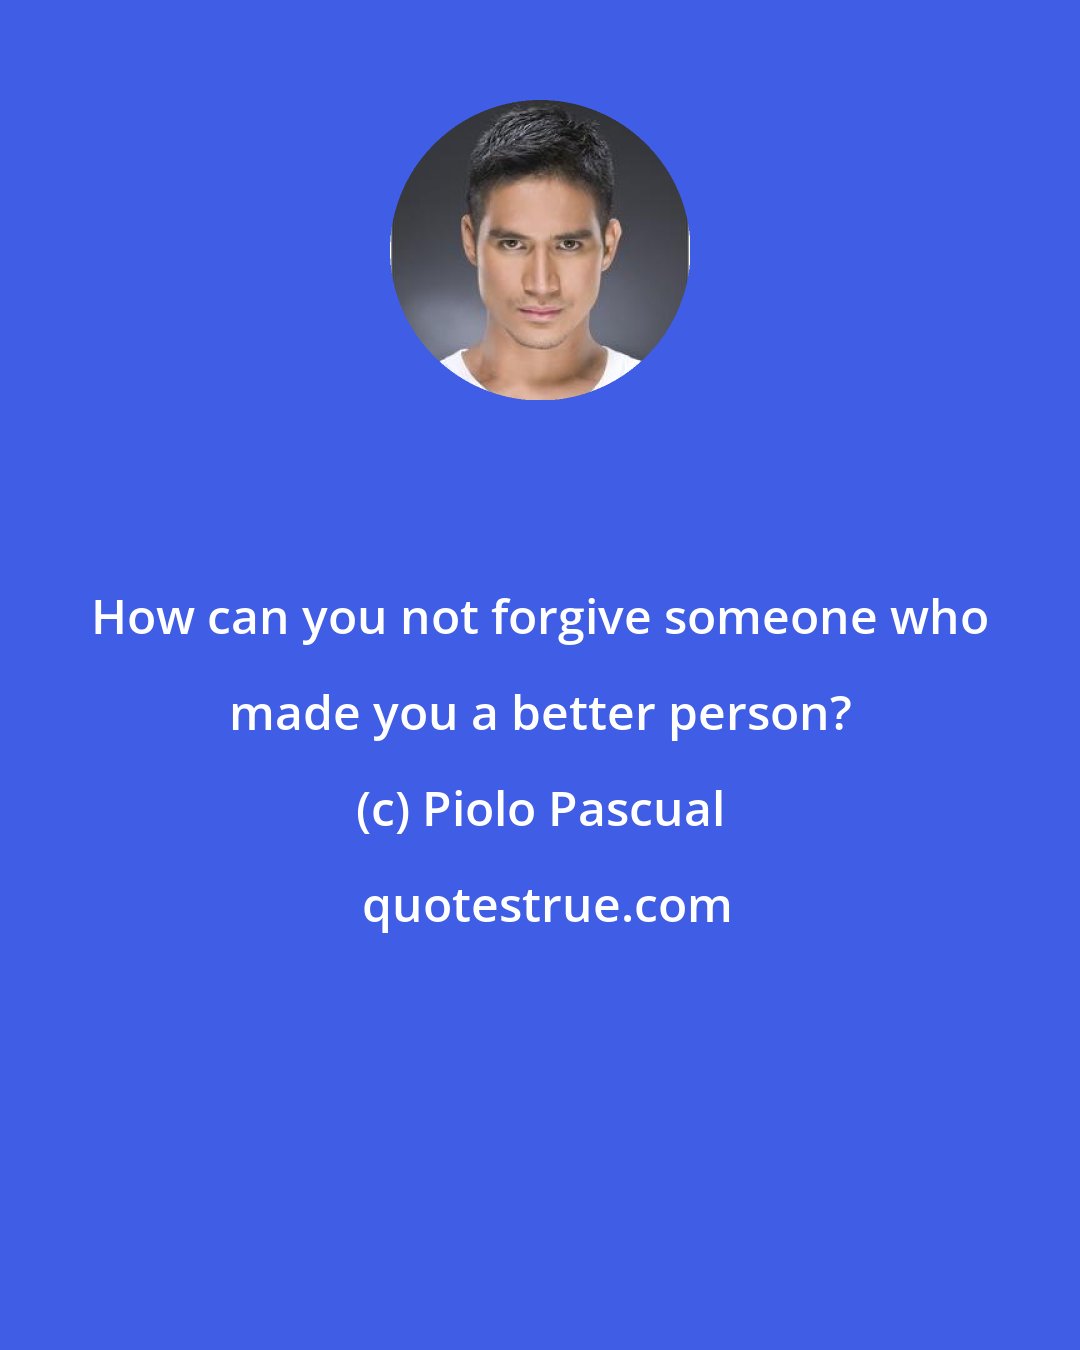 Piolo Pascual: How can you not forgive someone who made you a better person?